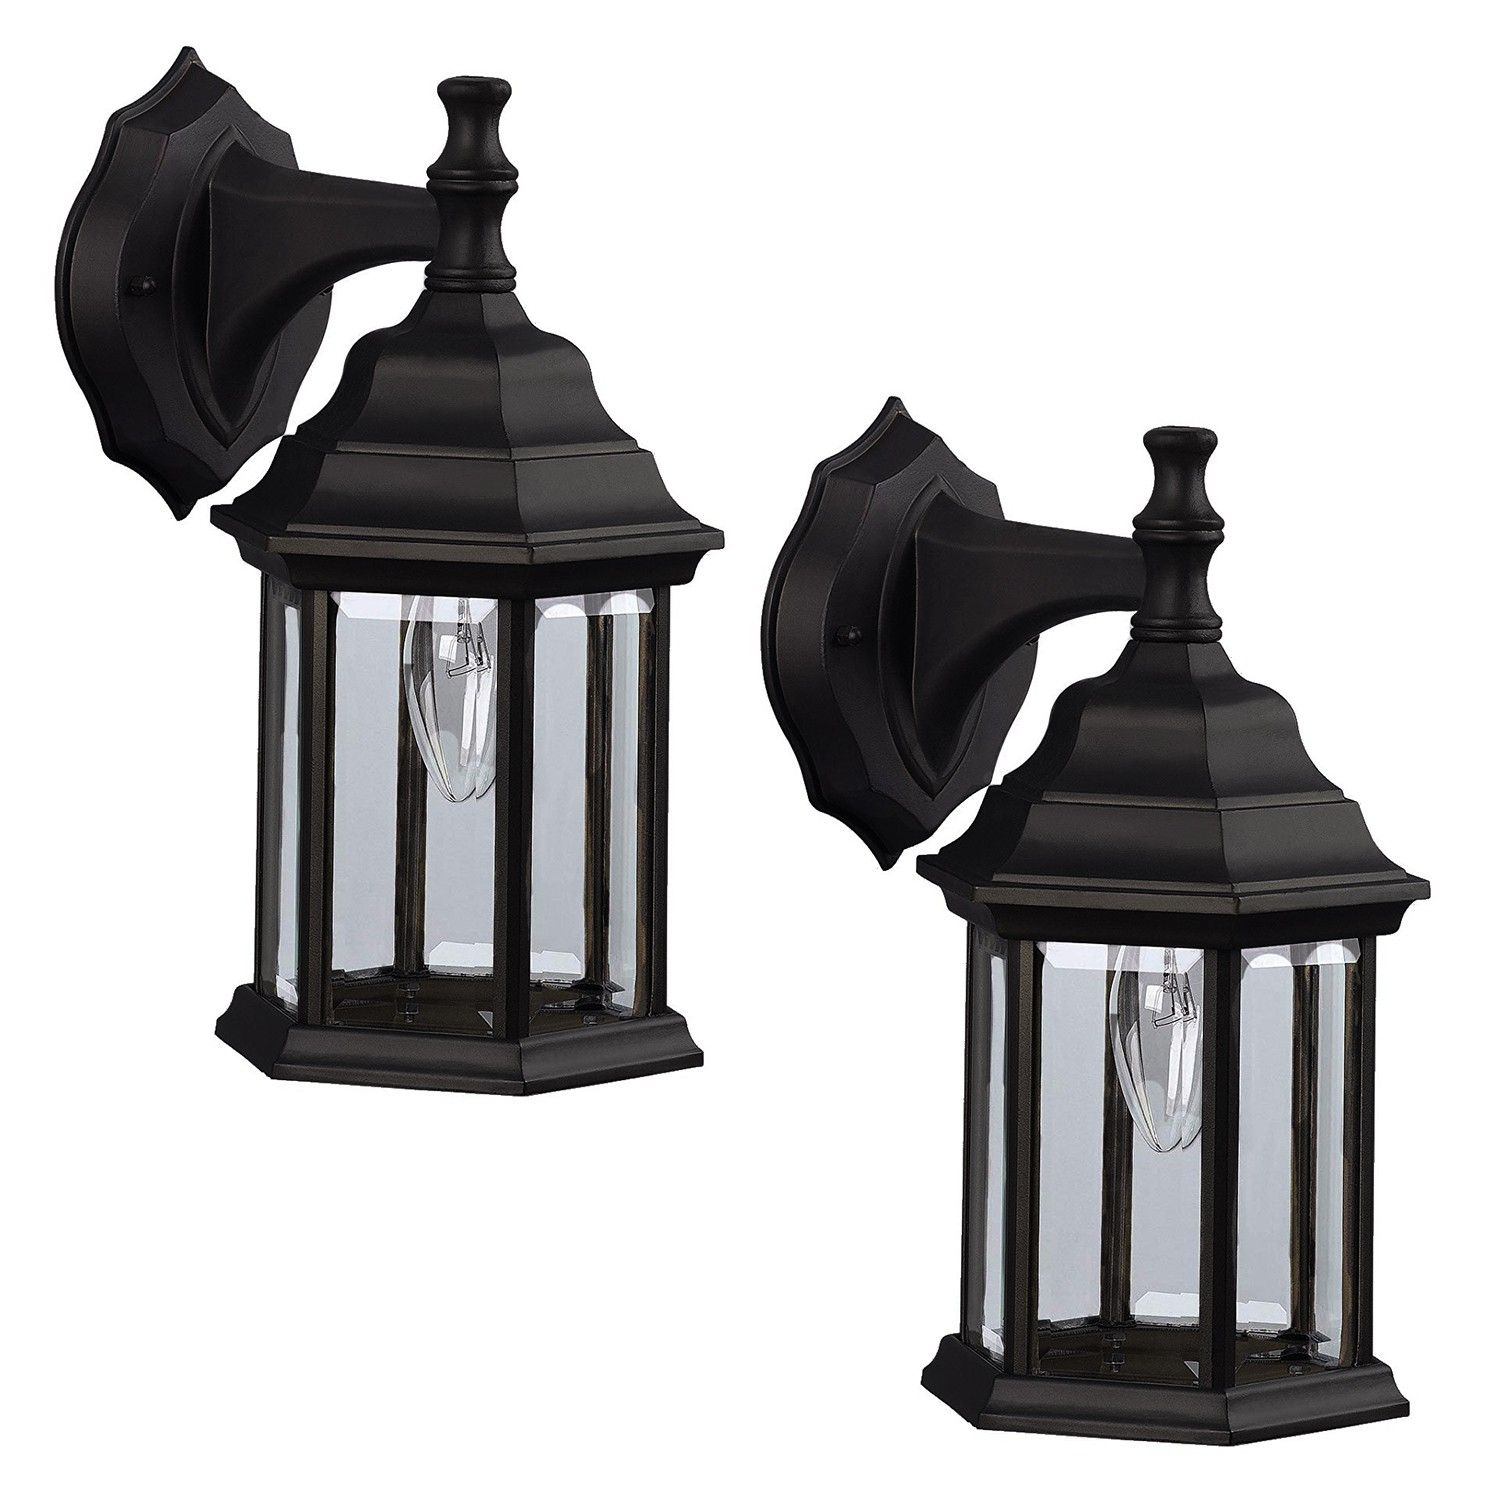 Bennington Iol4orb 2 Pack Outdoor Exterior Lantern Light Fixture, Oil  Rubbed Bronze Within Bennington 6 Light Candle Style Chandeliers (View 28 of 30)